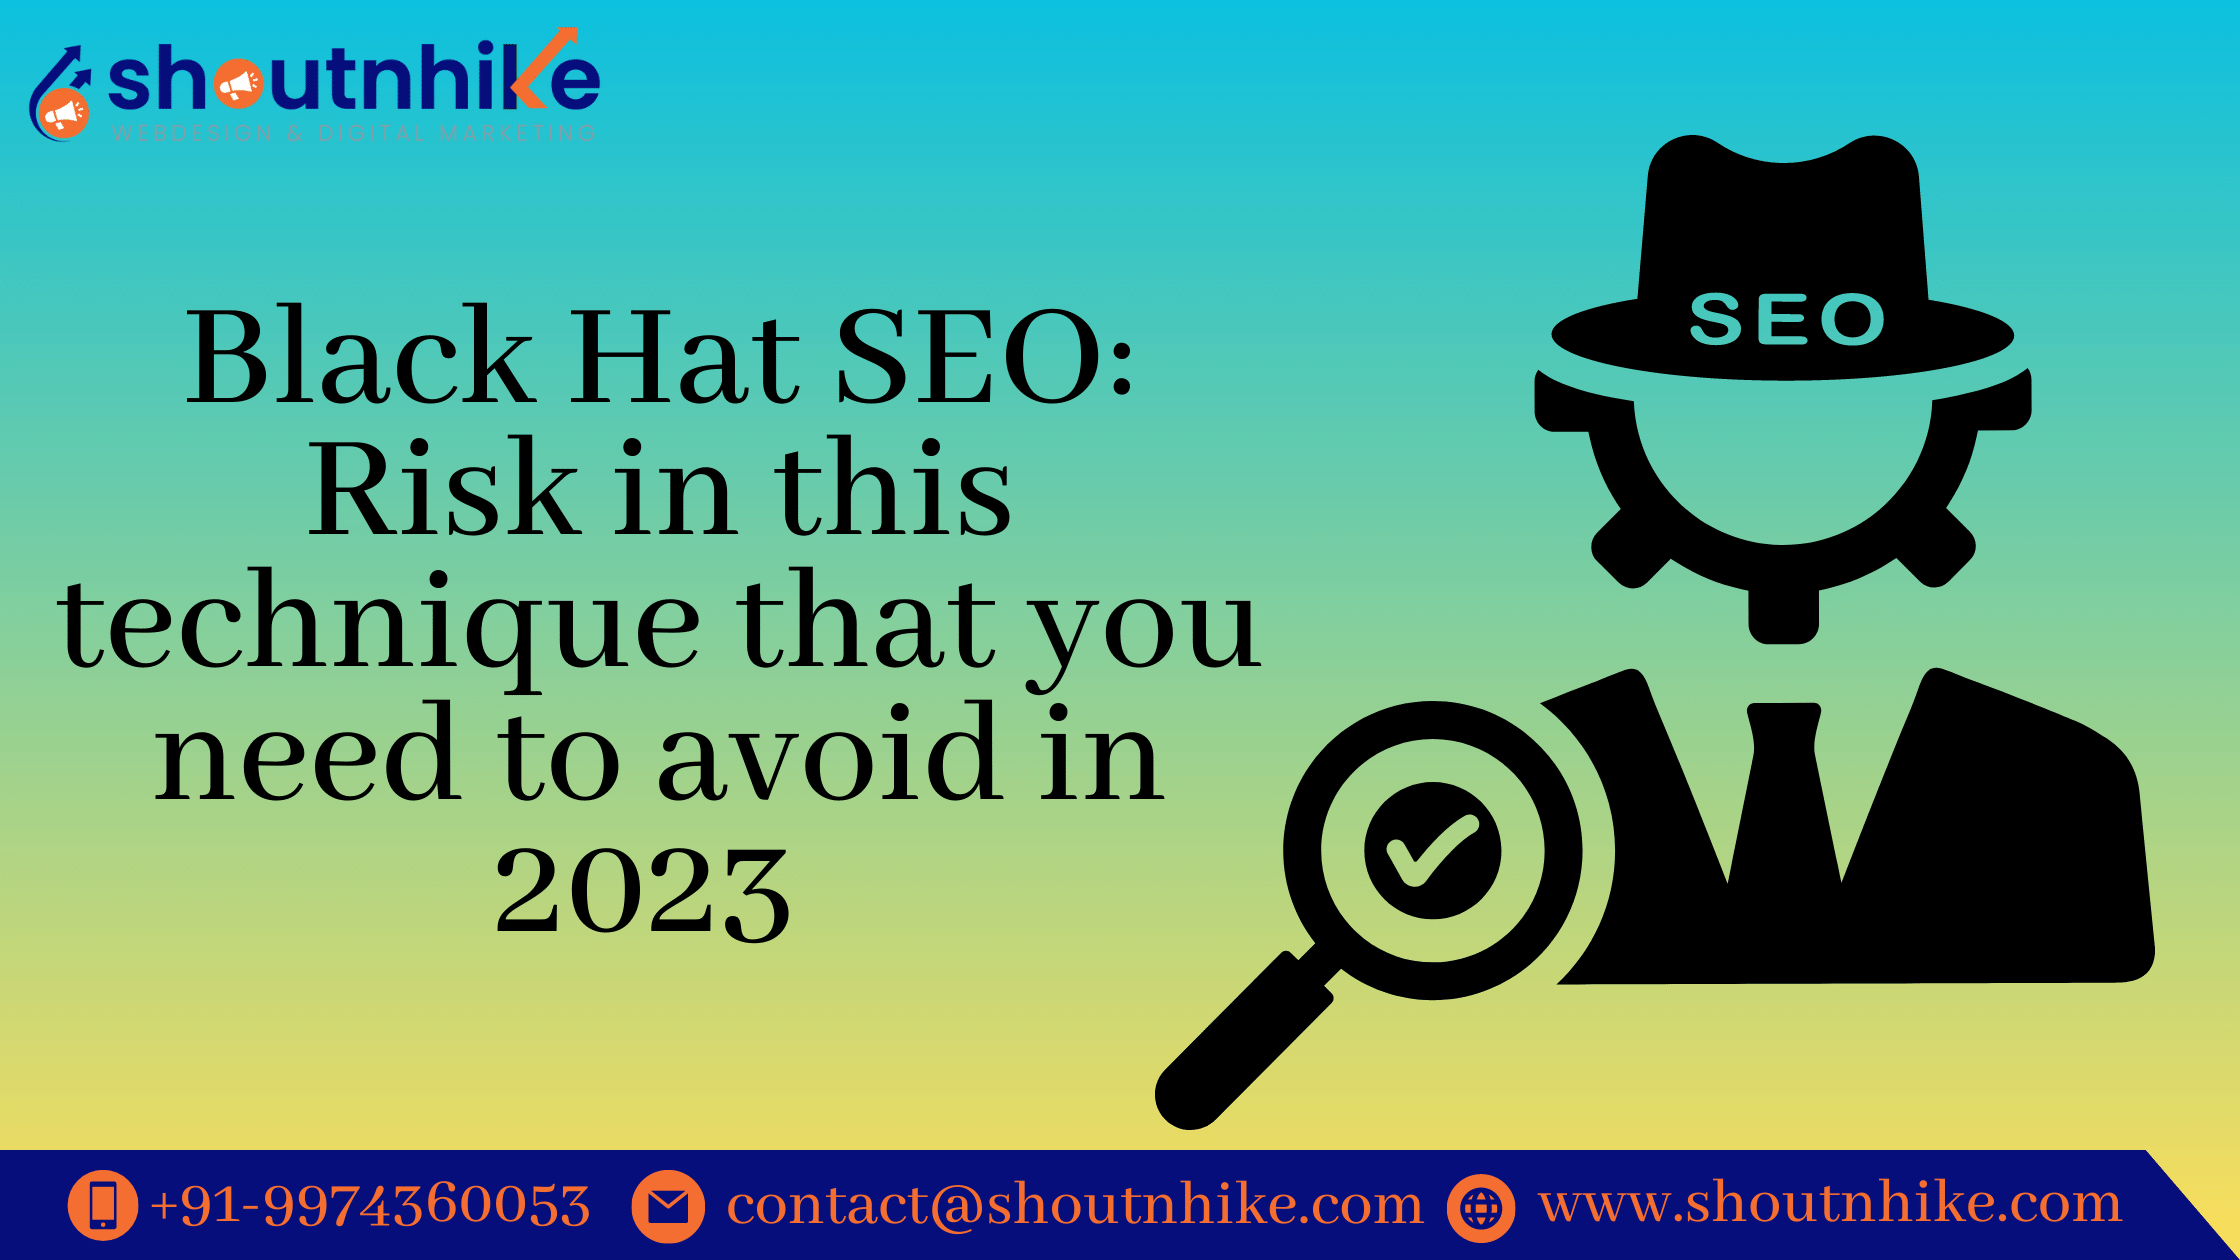 Black Hat SEO: Risk in this technique that you need to avoid in 2023